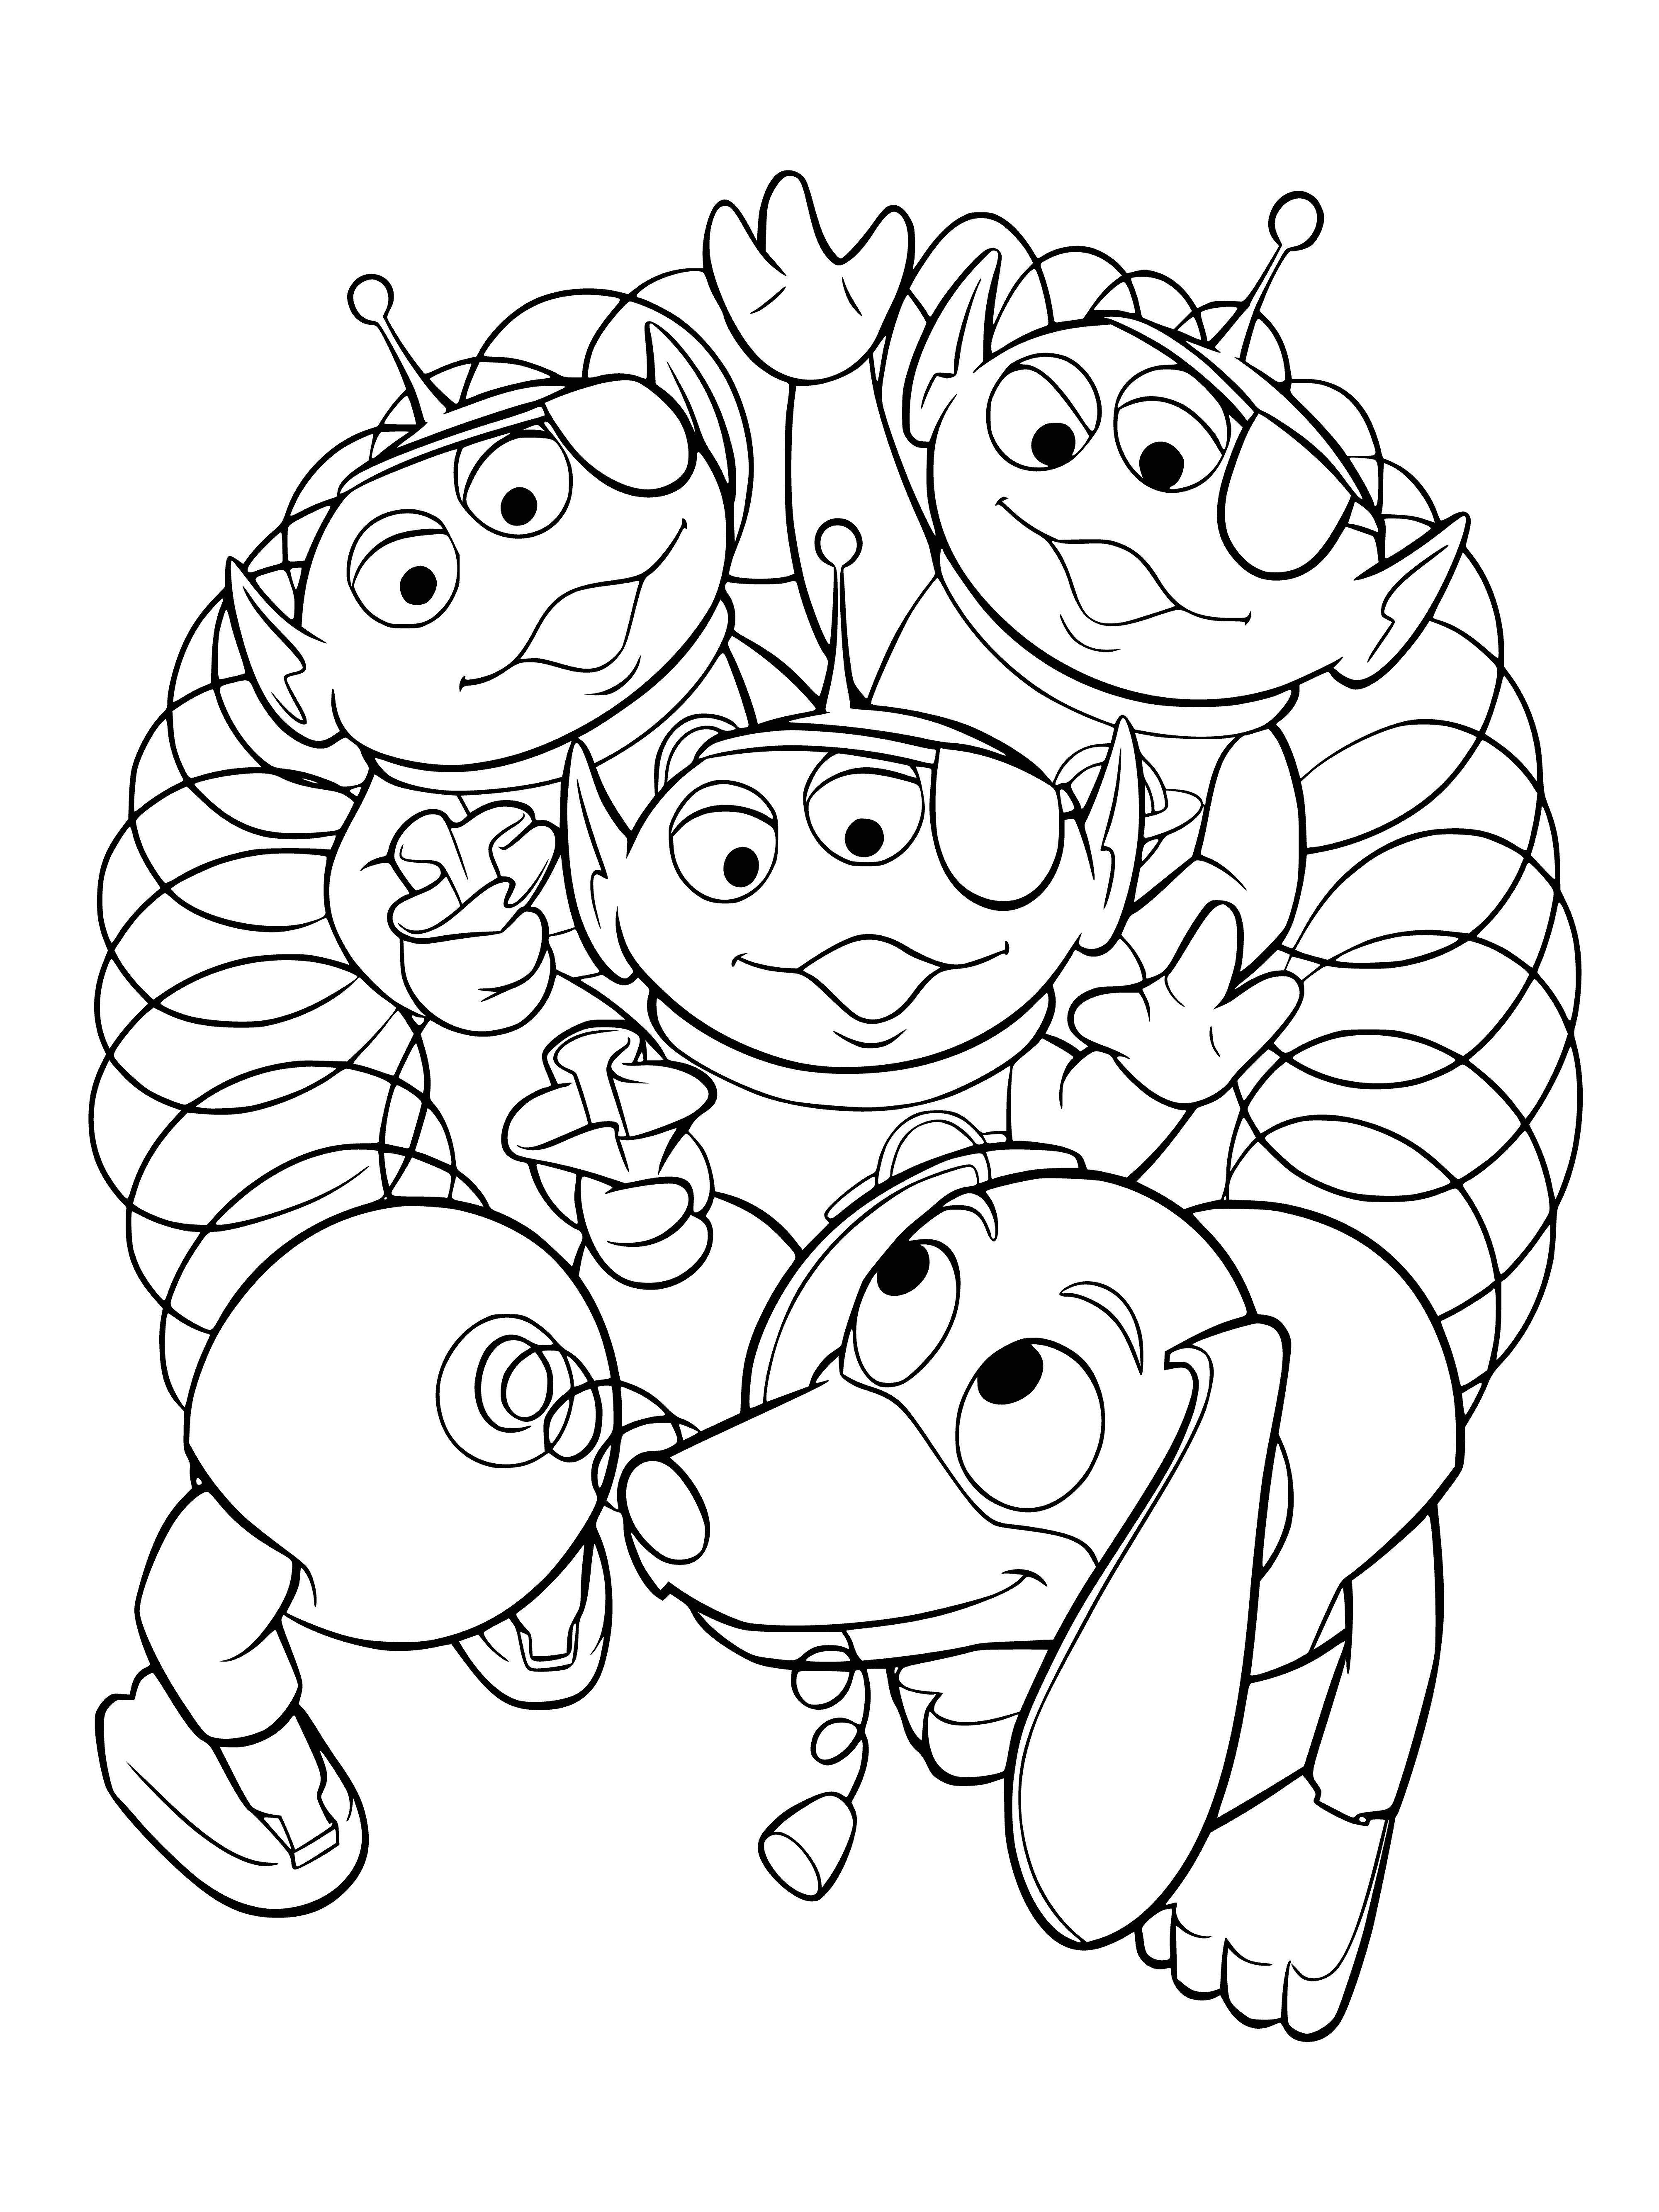 coloring page: Dog with brown collar chases 3-eyed aliens in purple shirts & red pants in a scene based on Toy Story movie.